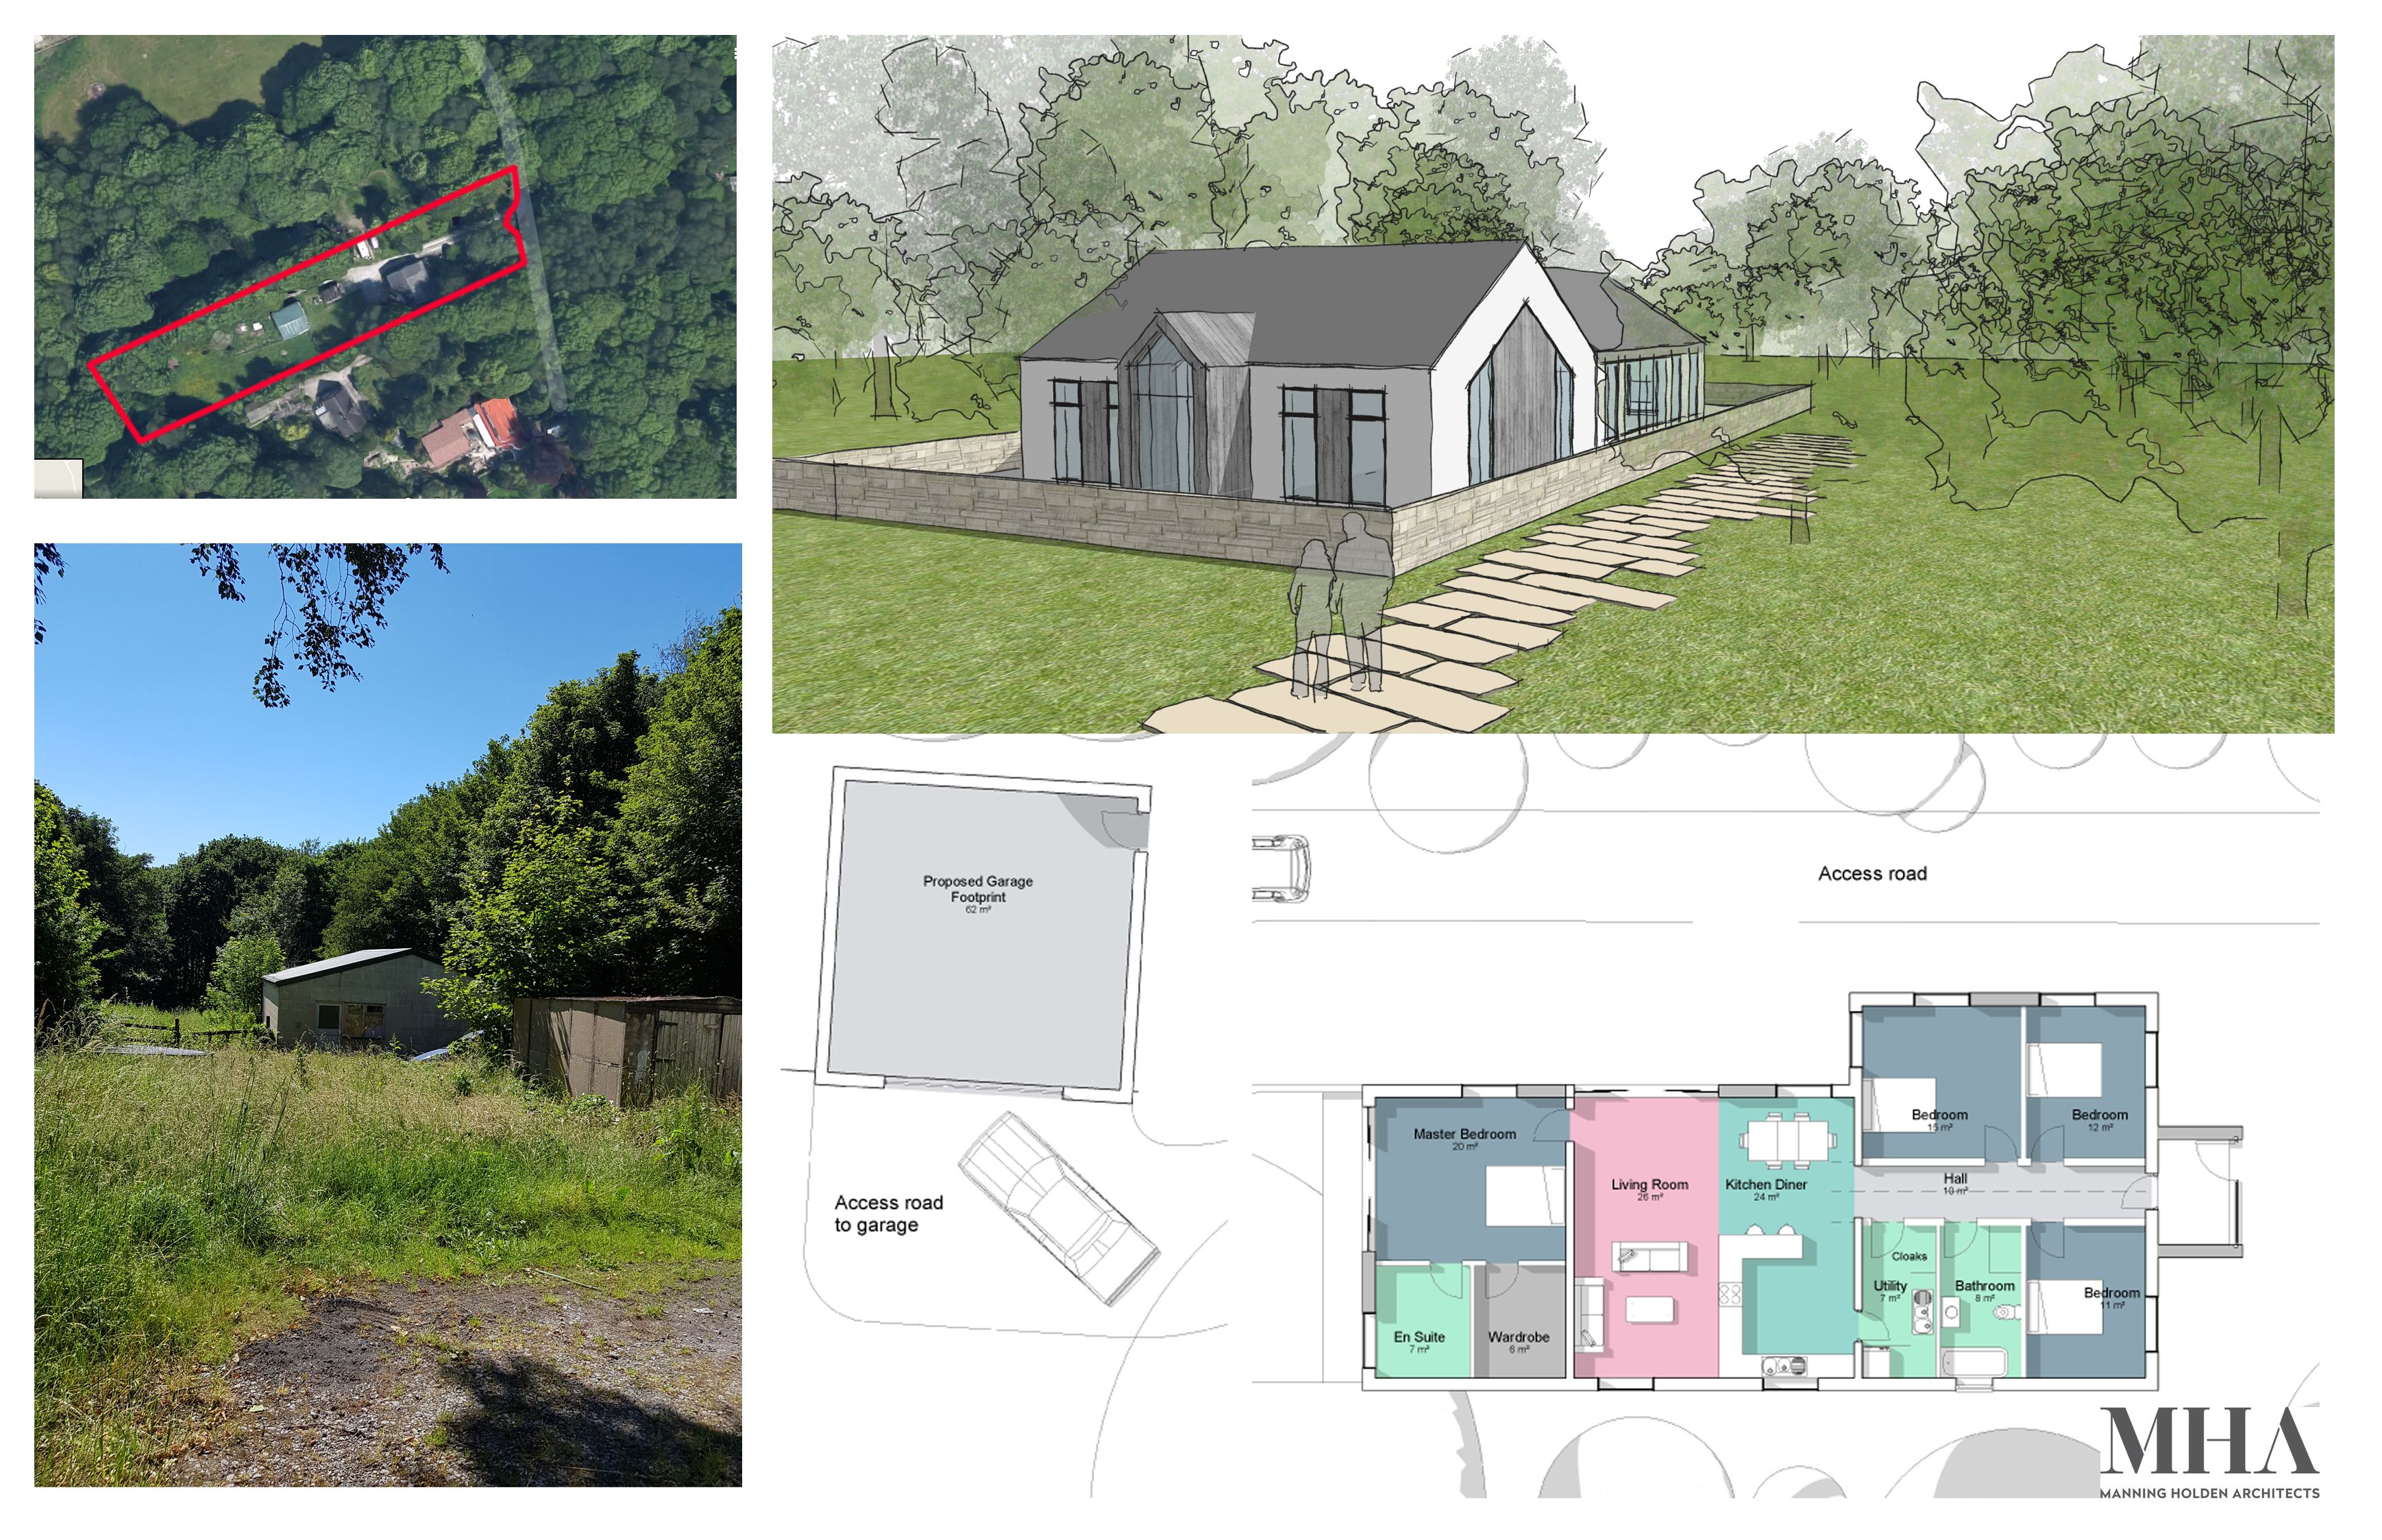 Planning permission granted for bungalow in Chesterfield